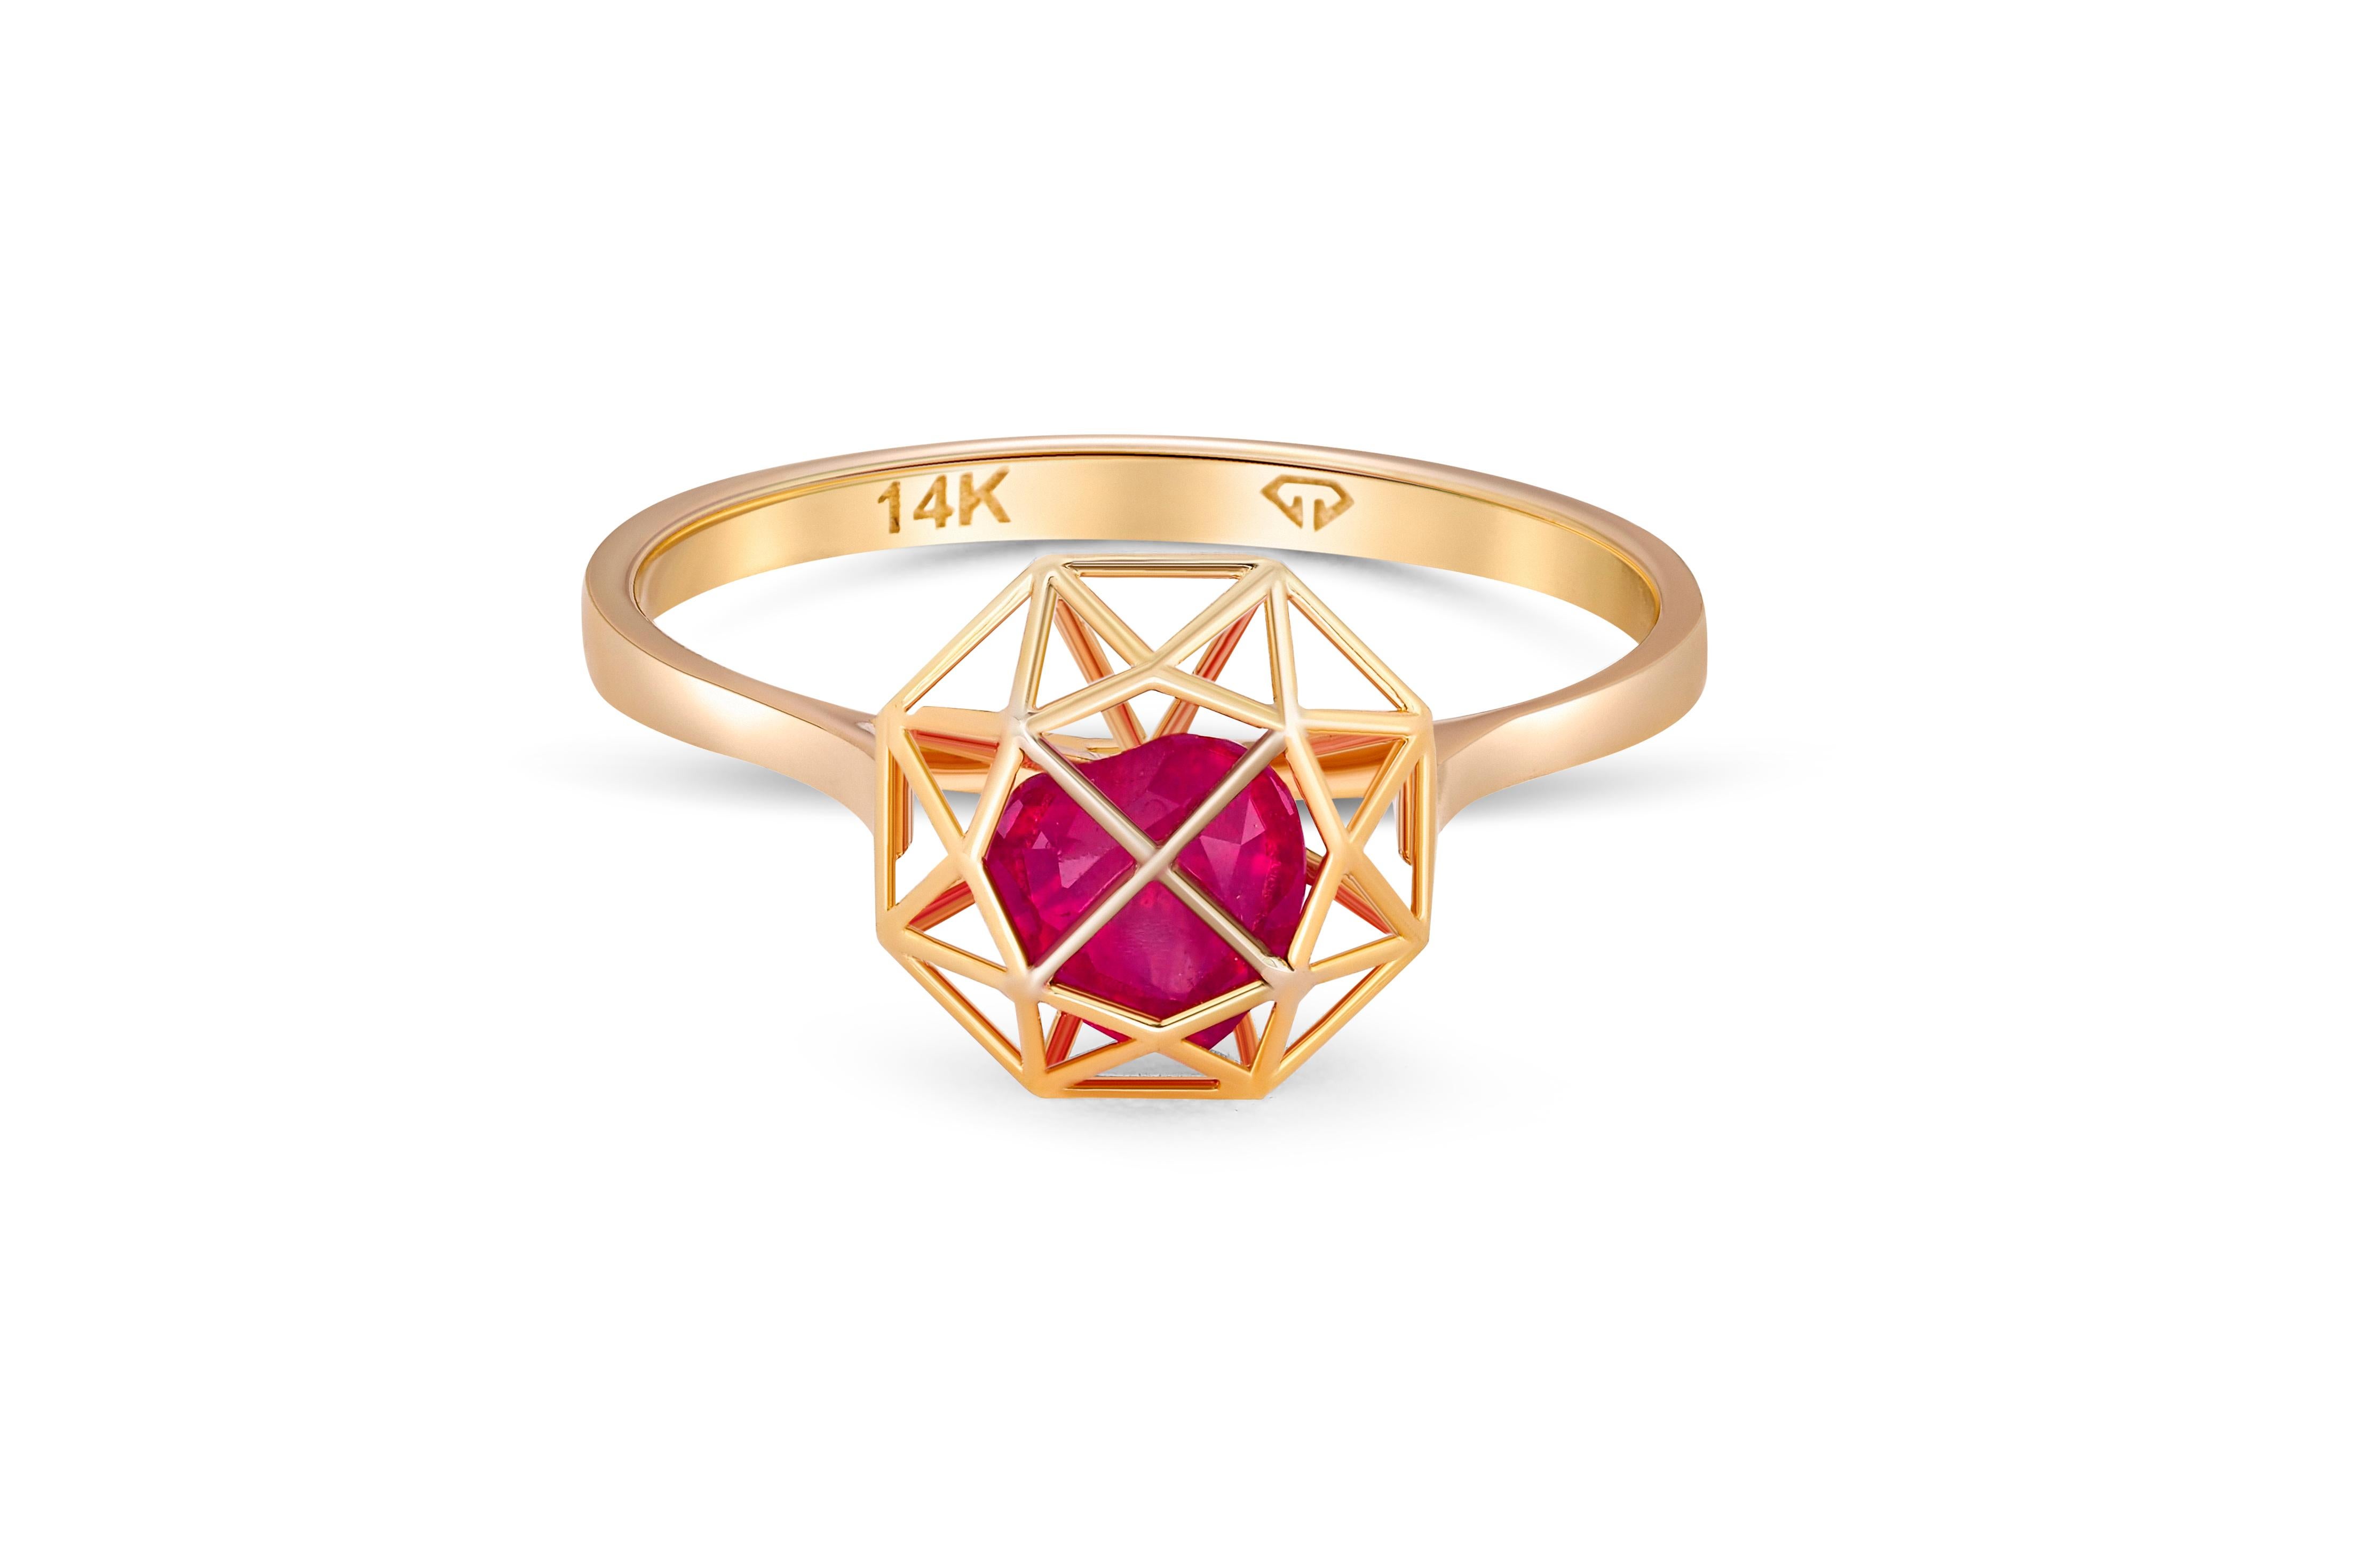 Heart ruby 14k gold ring. 
Red ruby heart in jail ring. Heart in a prison ring. Spider web ring. July birthstone ring. Valentine gift ring.

Metal: 14k gold
Weight: 1.7 g. depends from size.

Set with ruby, color - red
Heart cut, approx 0.50 ct. in